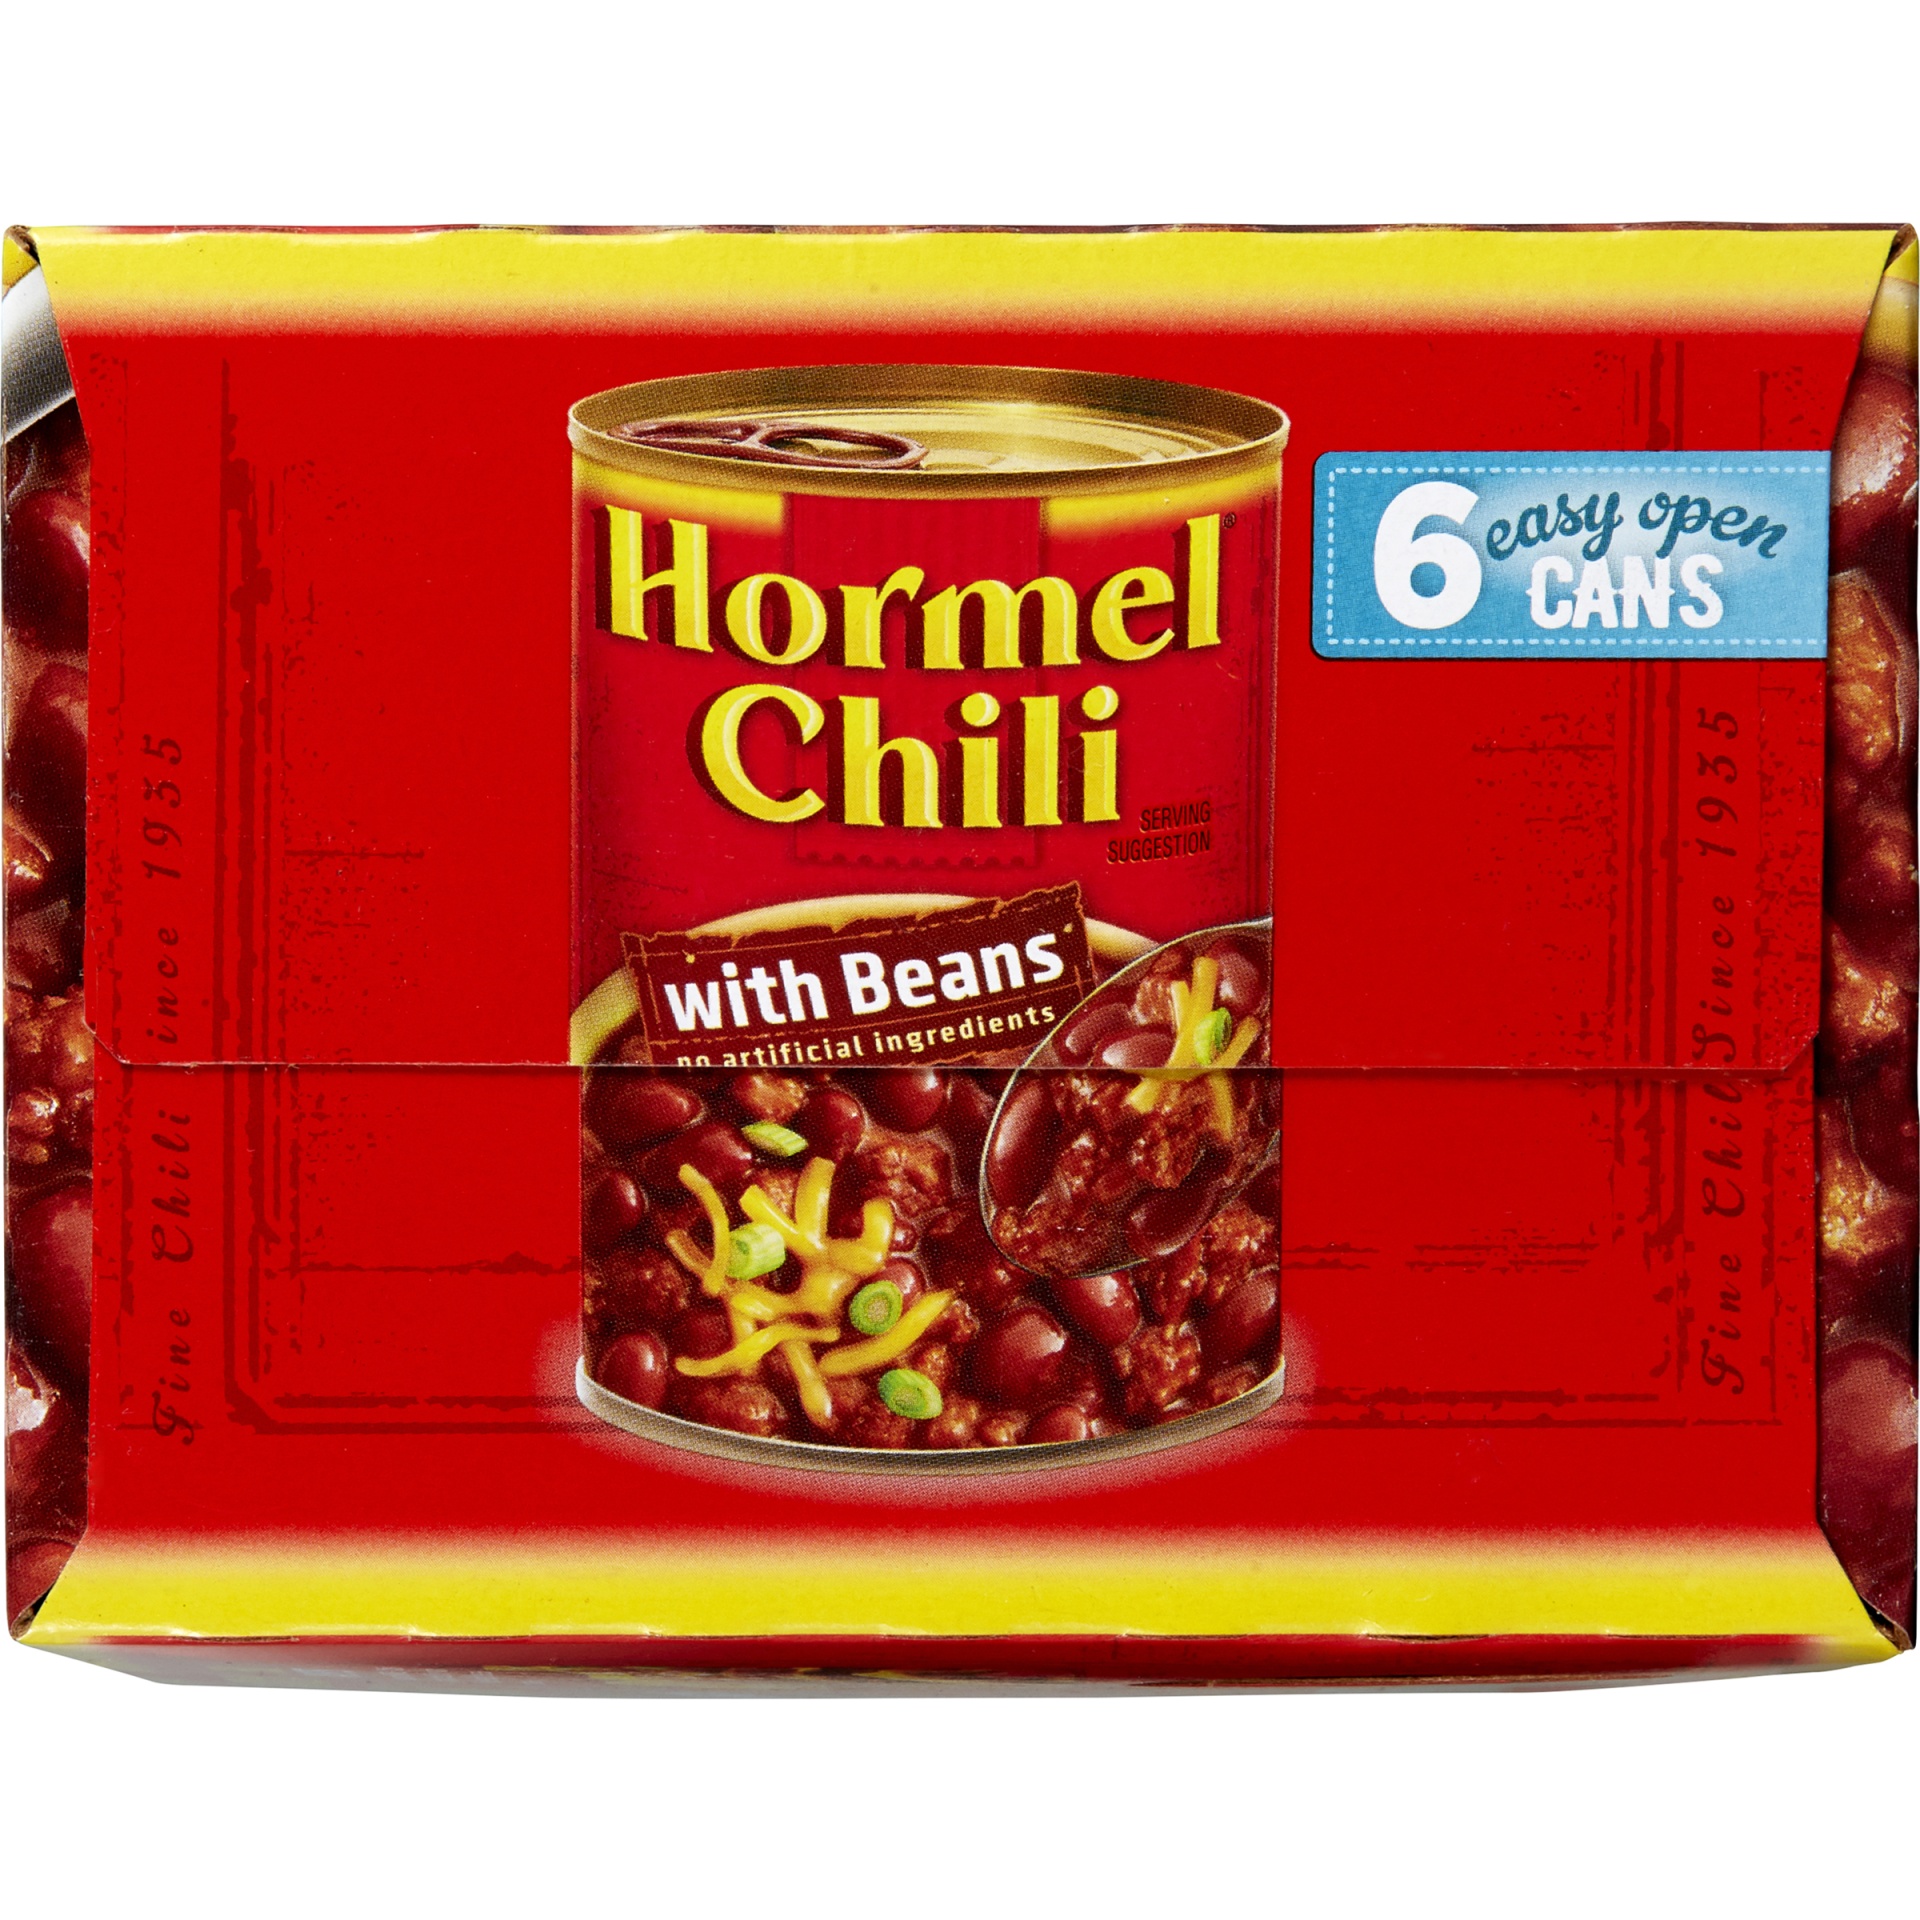 slide 4 of 6, Hormel Chili with Beans, 6 ct